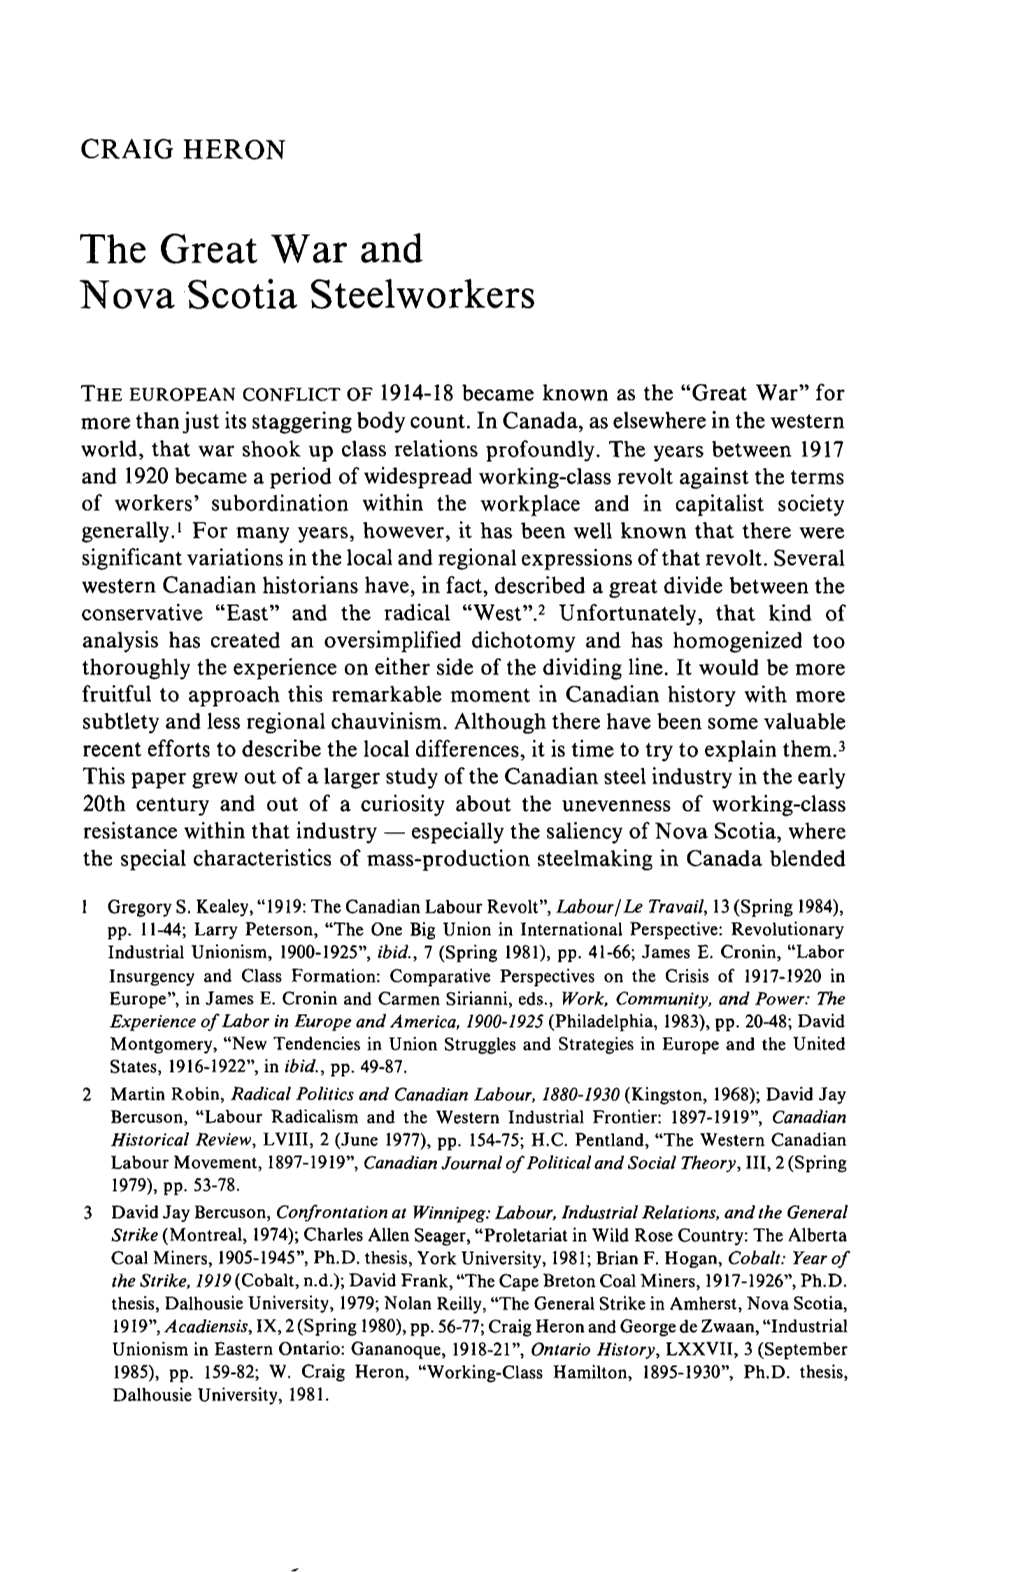 The Great War and Nova Scotia Steelworkers